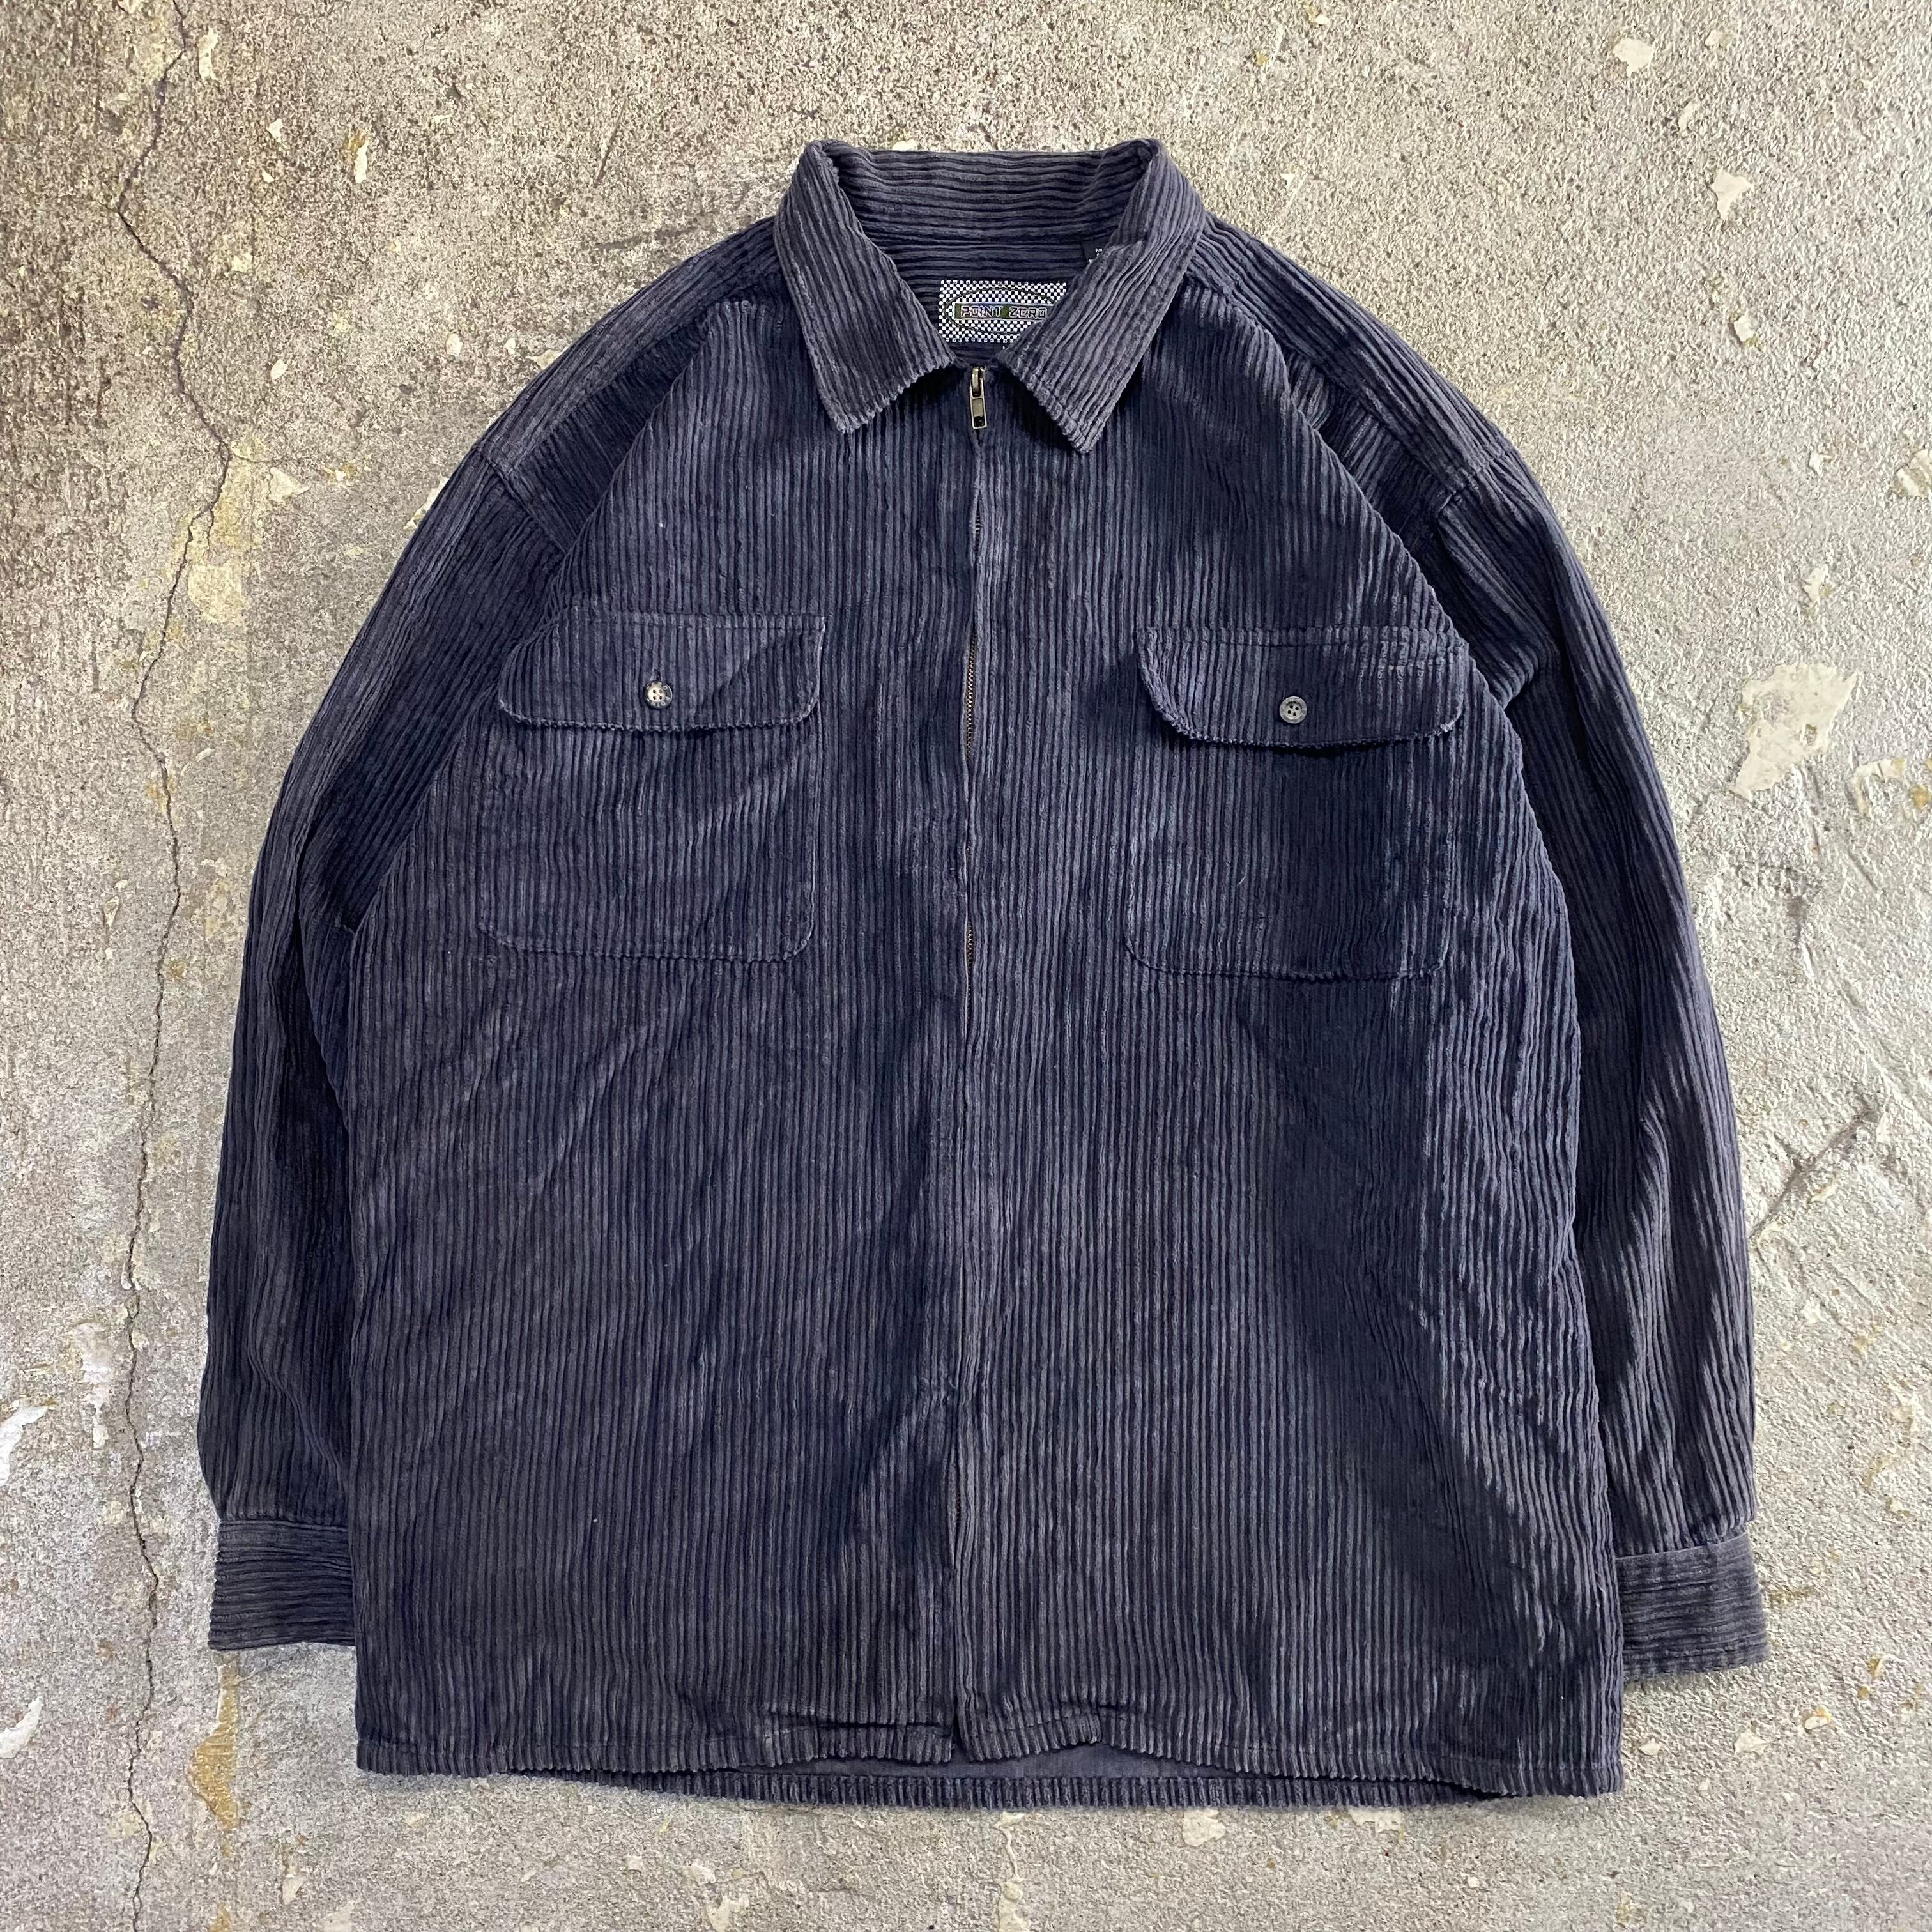 old POINT ZERO corduroy zip-up shirt jacket | What’z up powered by BASE